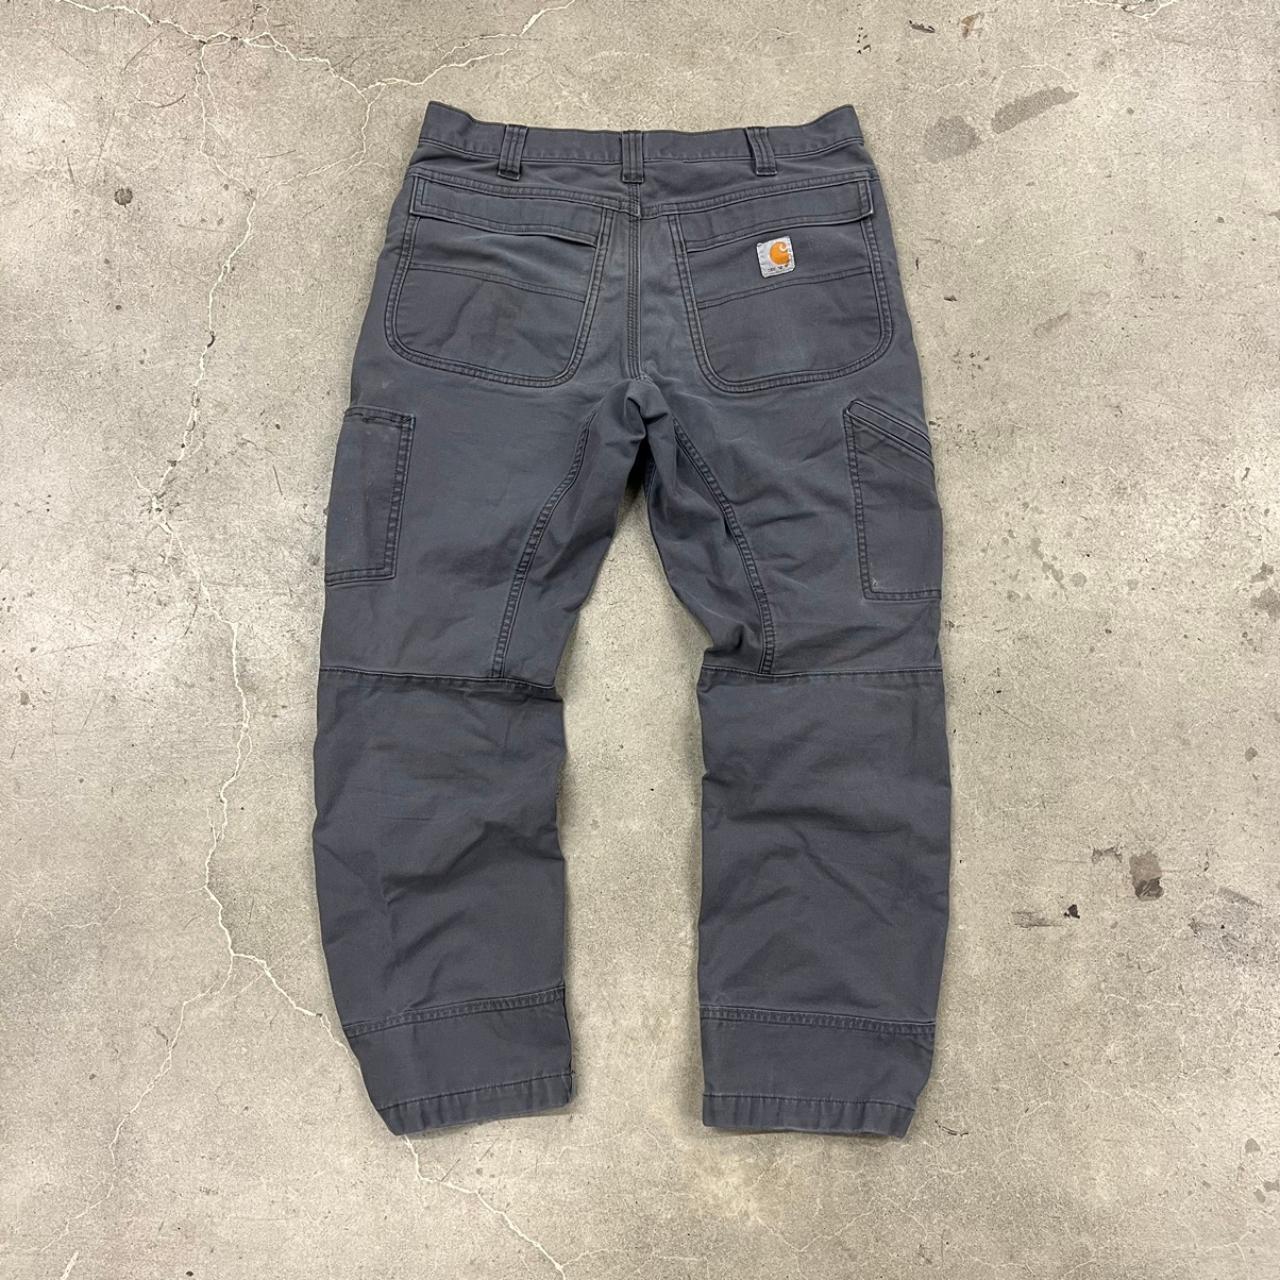 Carhartt - Every pair of our double-front work pants is built to